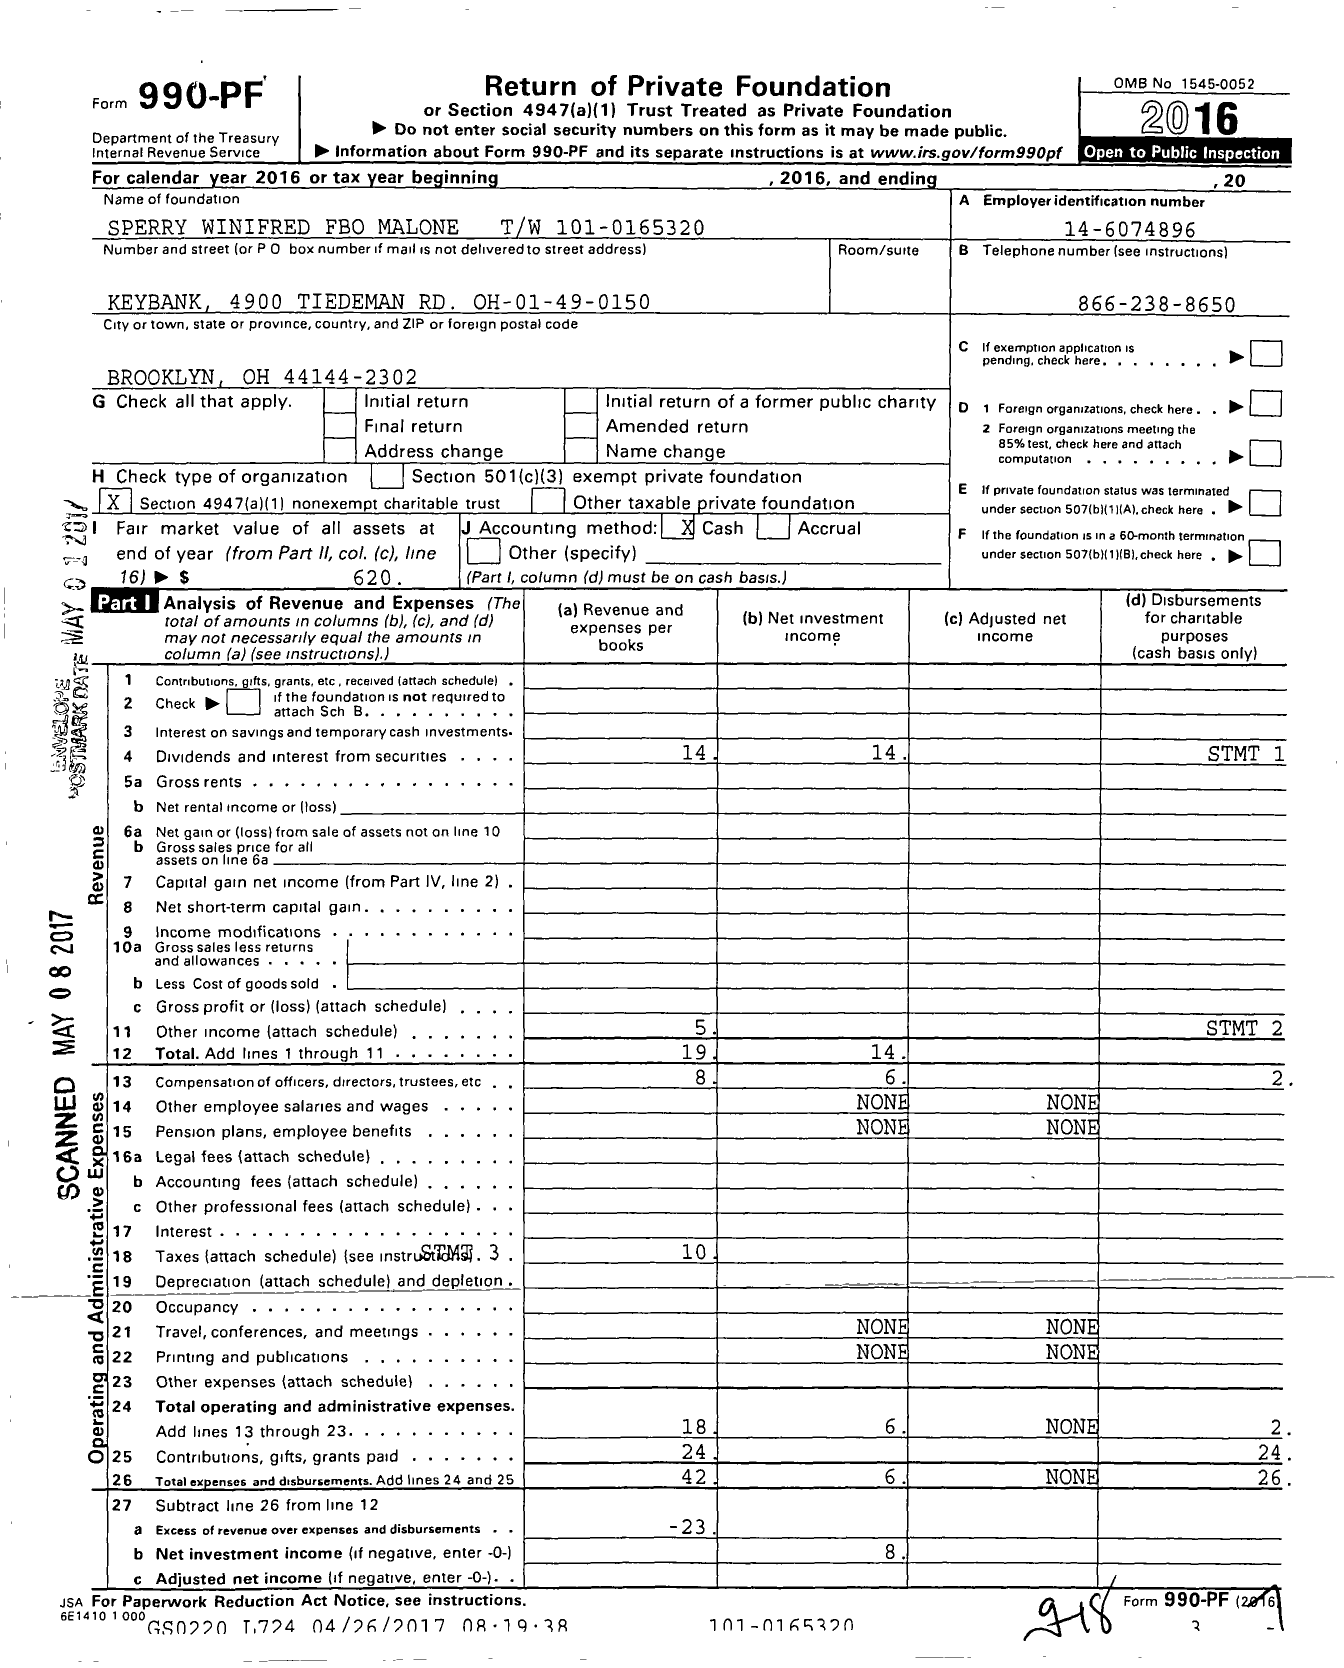 Image of first page of 2016 Form 990PF for Sperry Winifred Fbo Malone TW